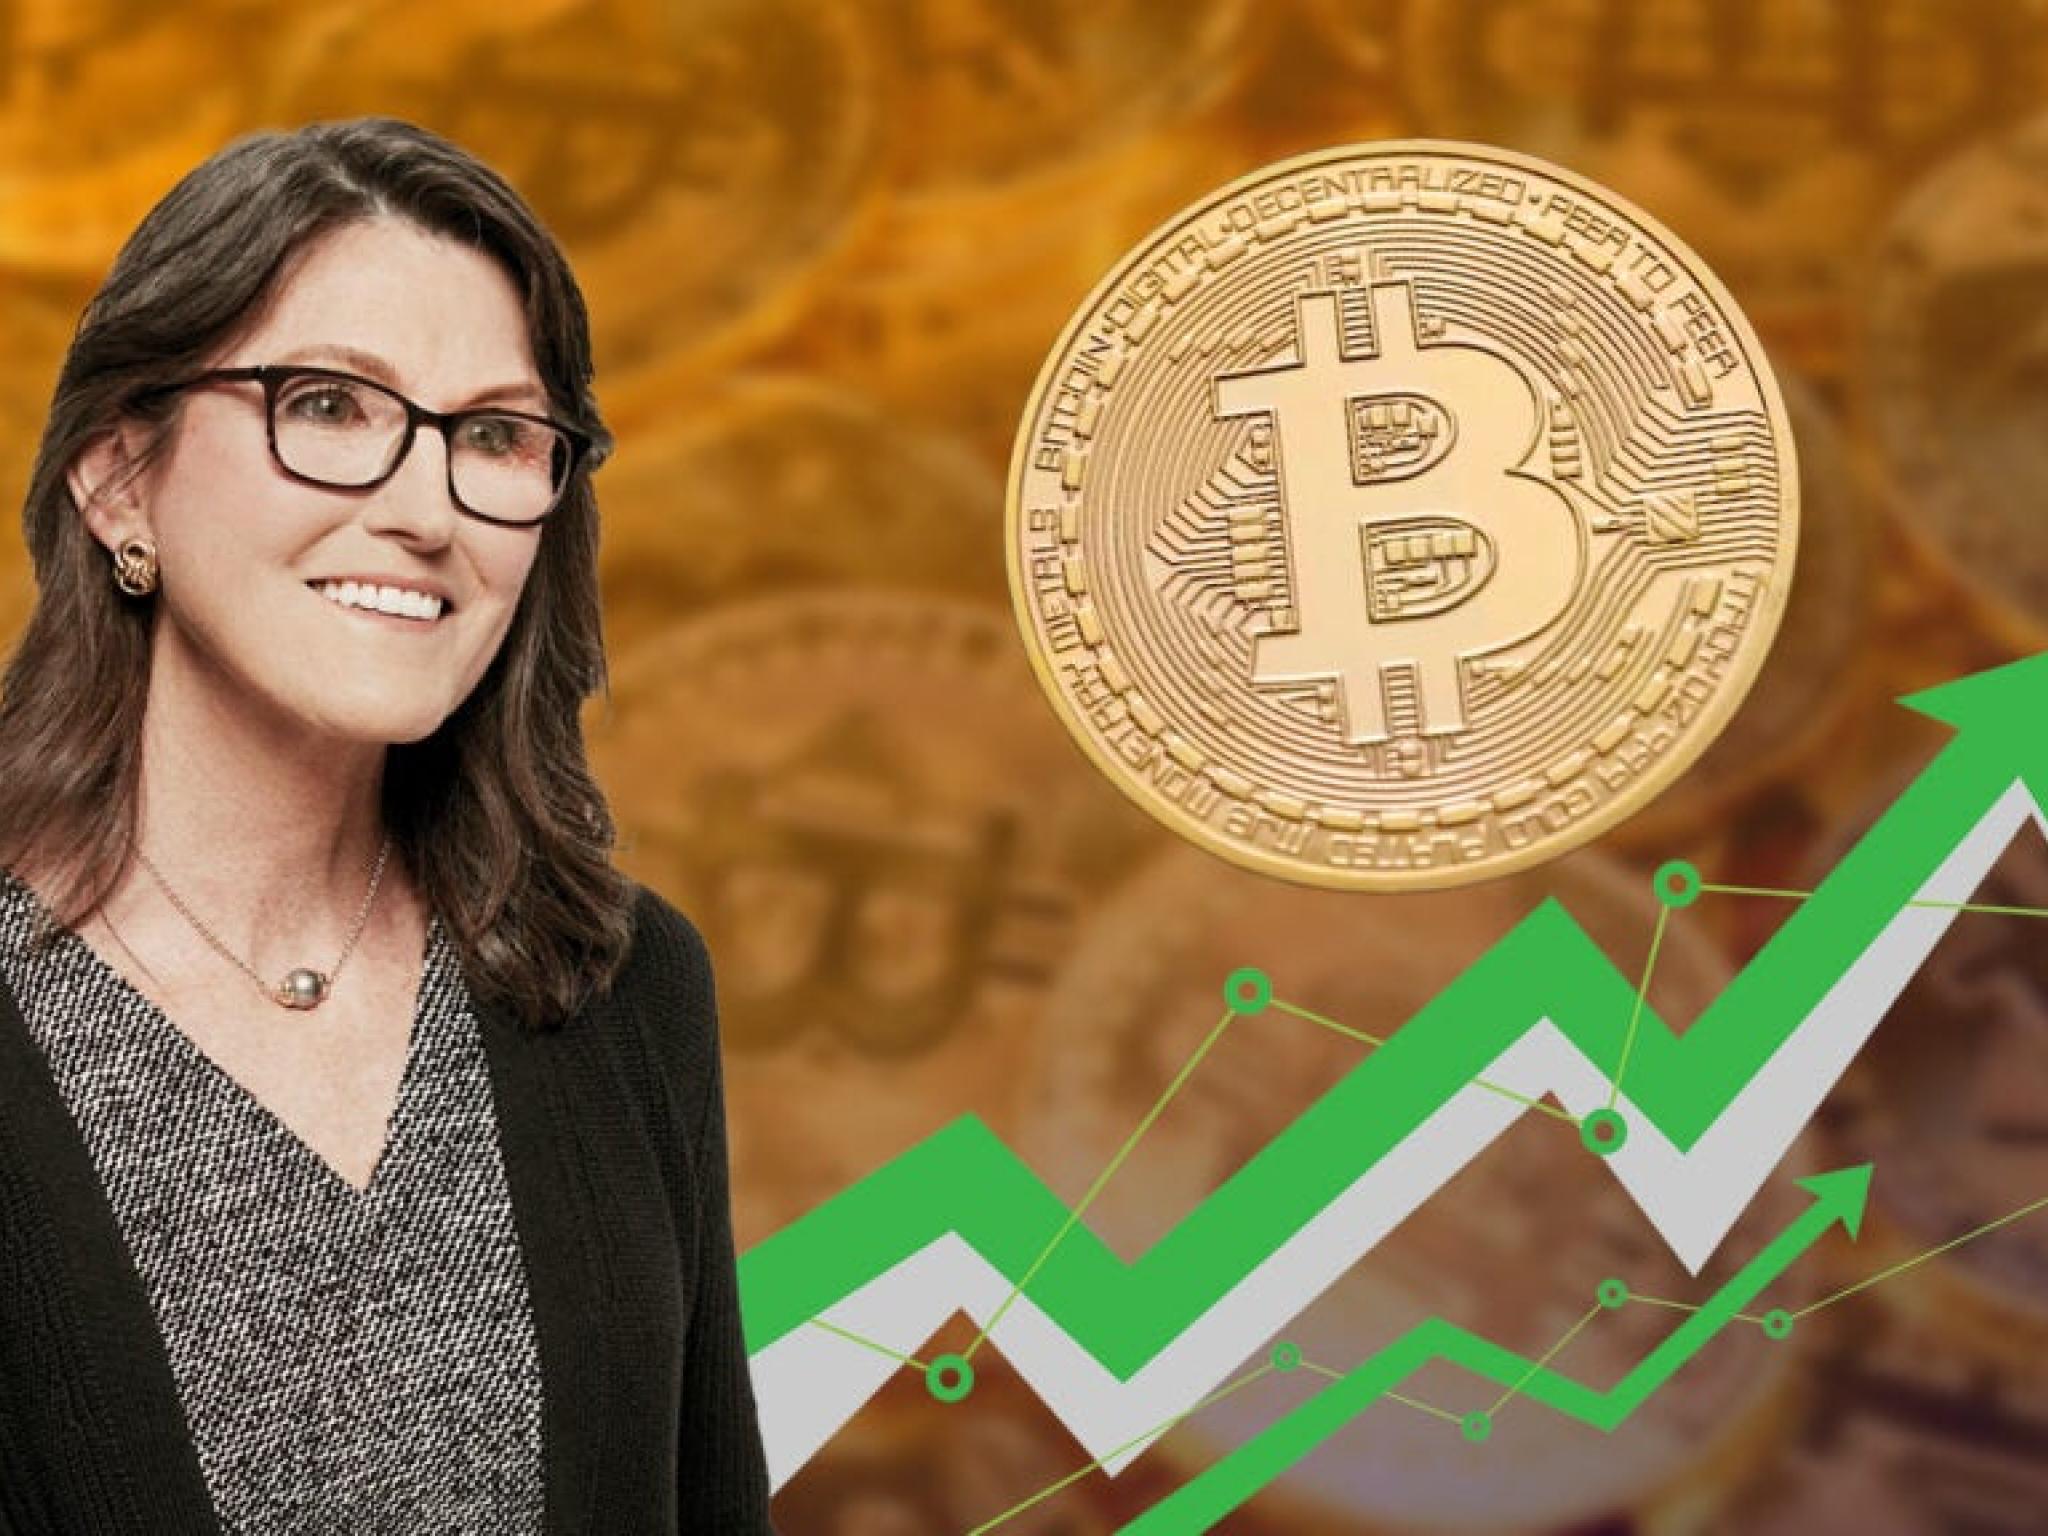  cathie-woods-ark-invest-sells-coinbase-shares-as-bitcoin-drops-below-key-62k-level 